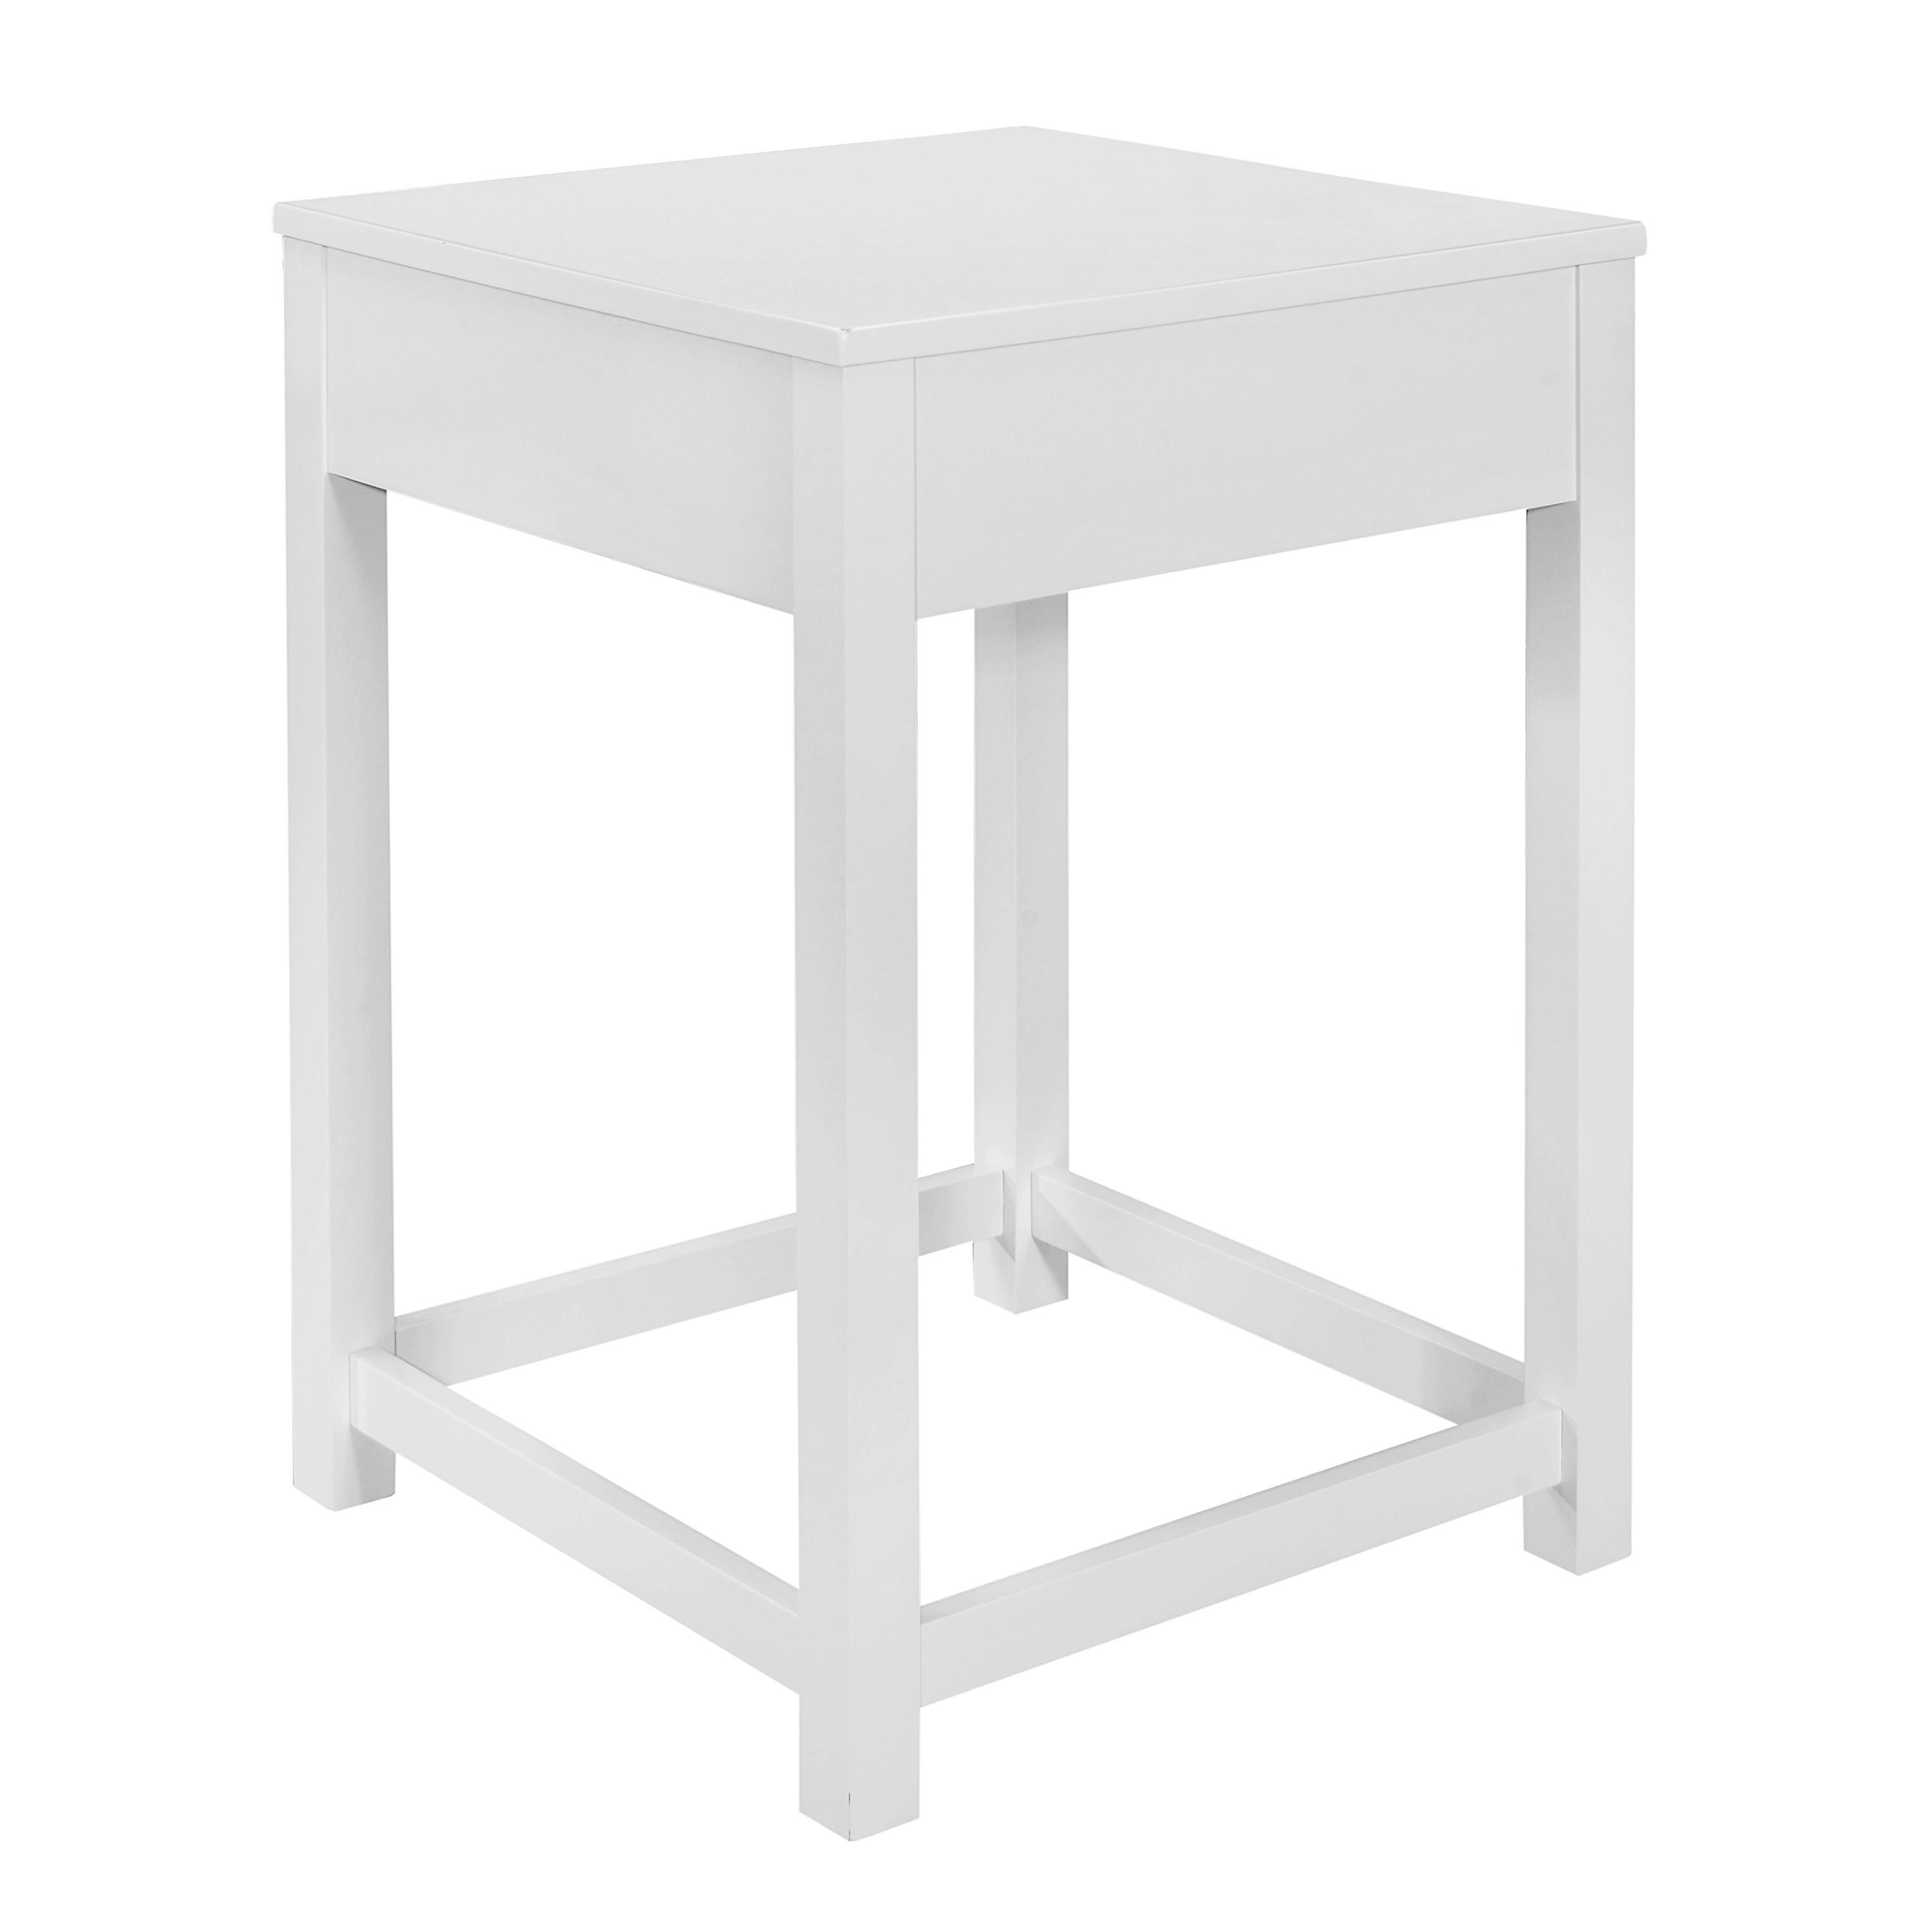 Transitional Corner desk 4522WH-17 Blanche 4522WH-17 in White 